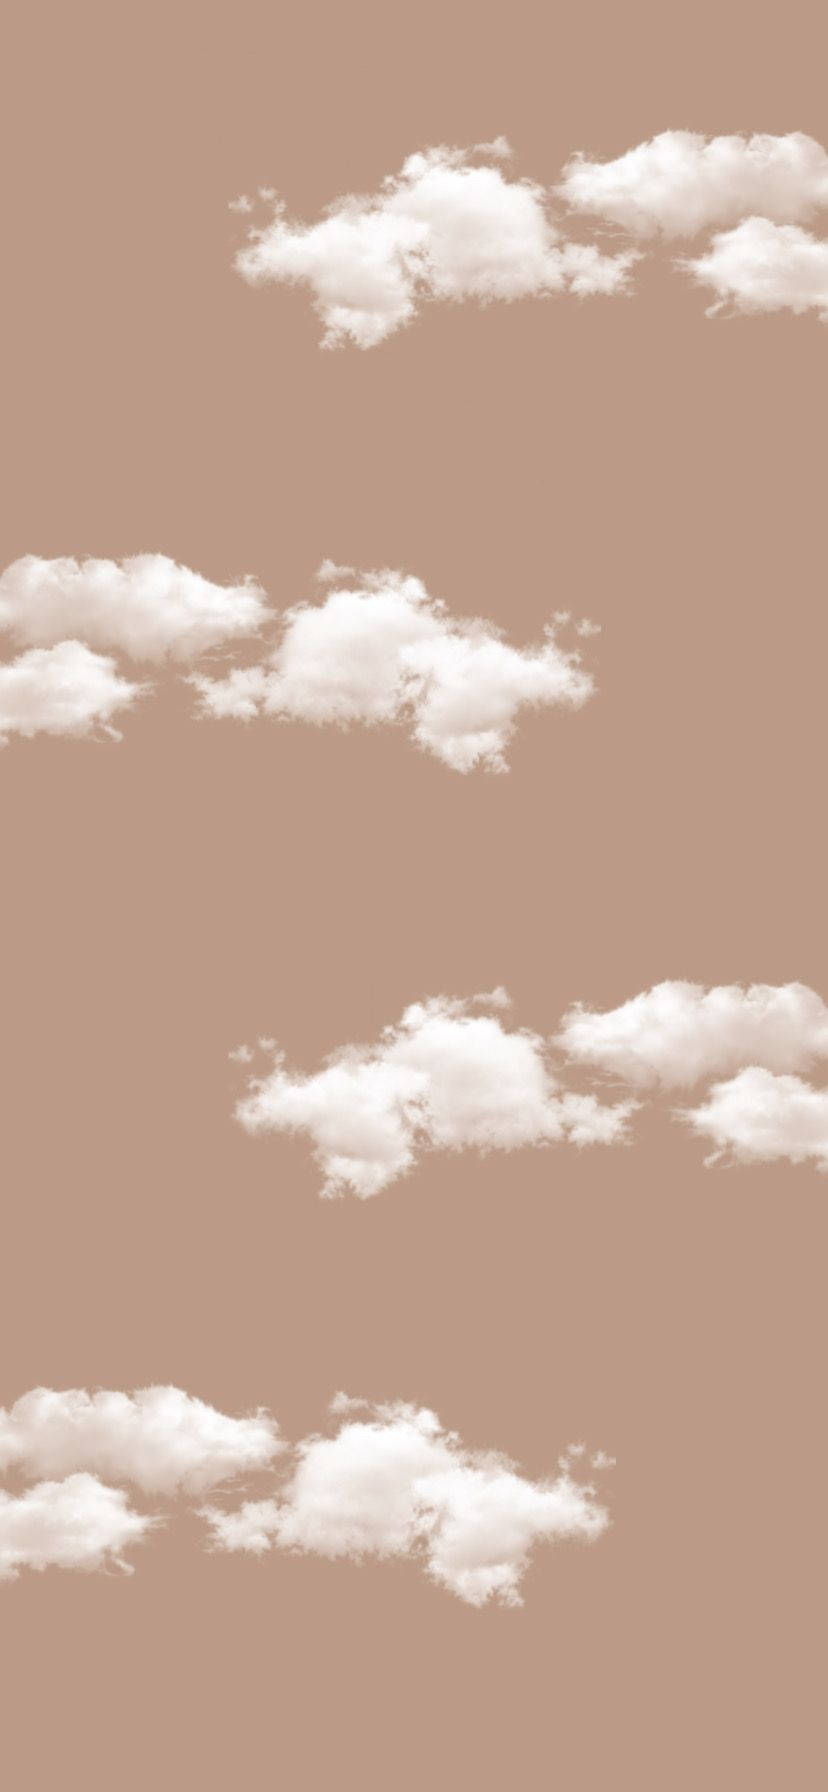 A soothing beige pastel background perfect for any setting. Wallpaper